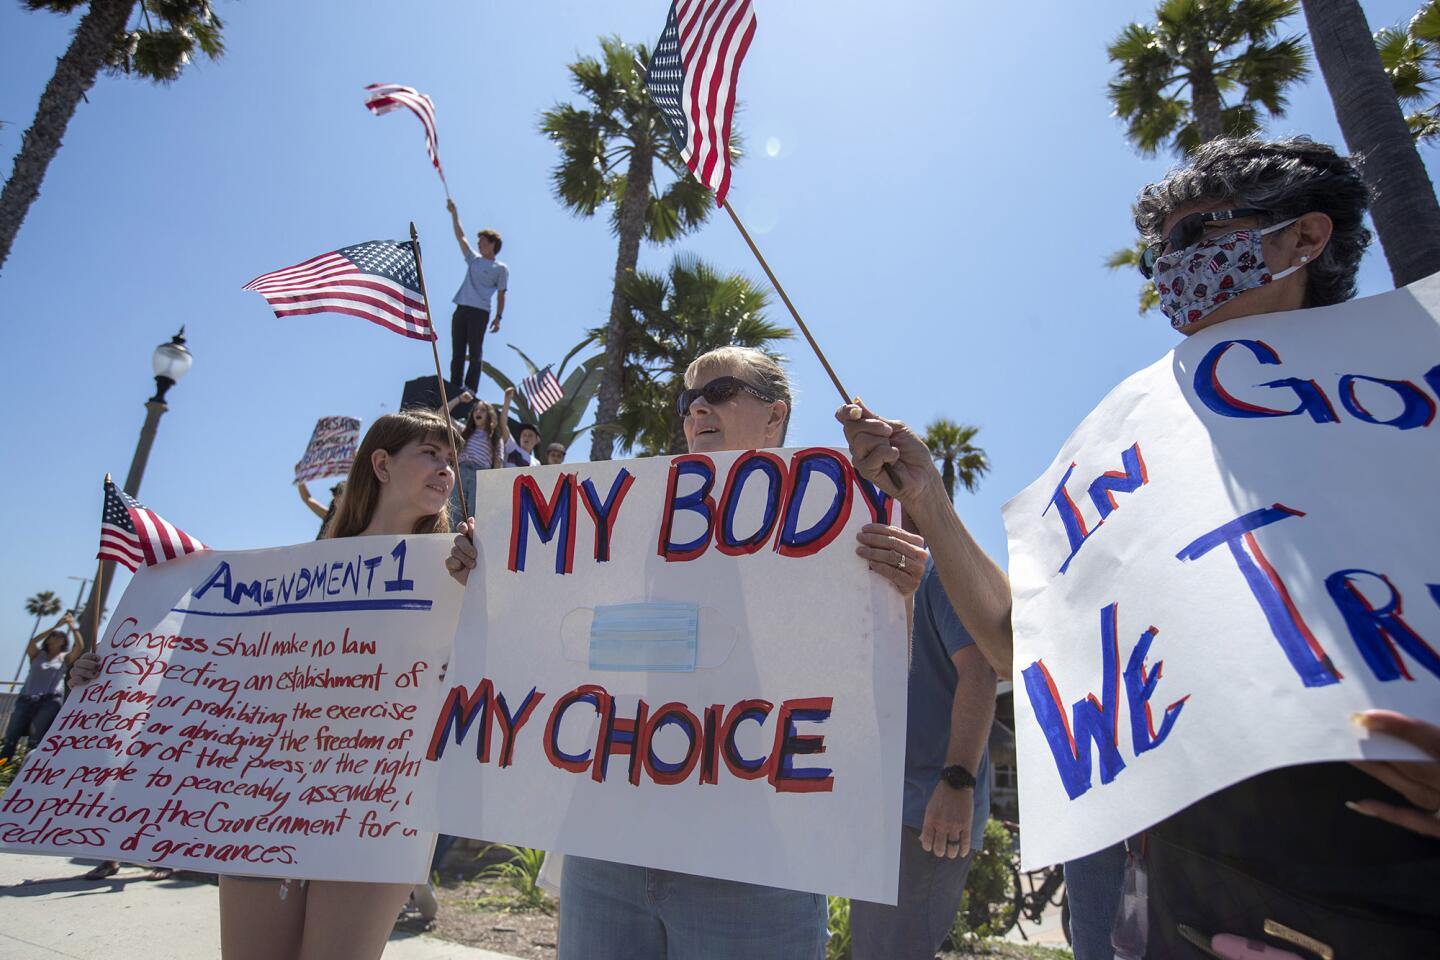 Madison Melendes, left, and Kelly Melendes, center and Priscilla Garcia, all from Costa Mesa, hold signs during a protest in Huntington Beach on Friday.